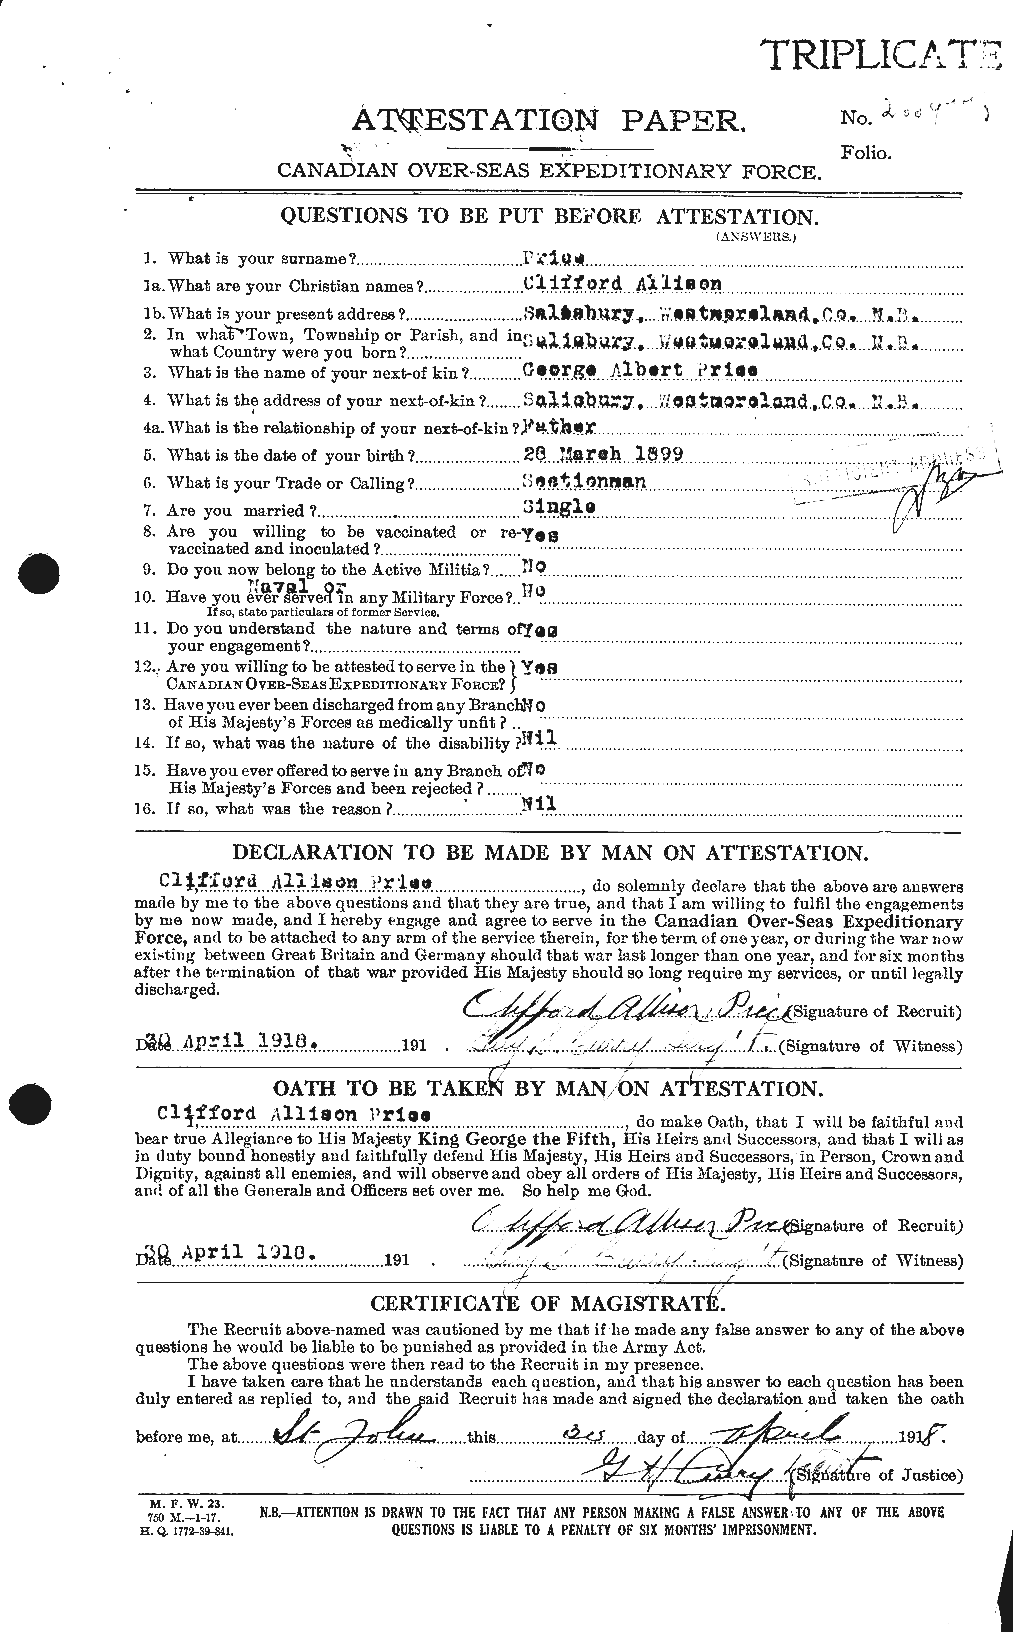 Personnel Records of the First World War - CEF 587001a